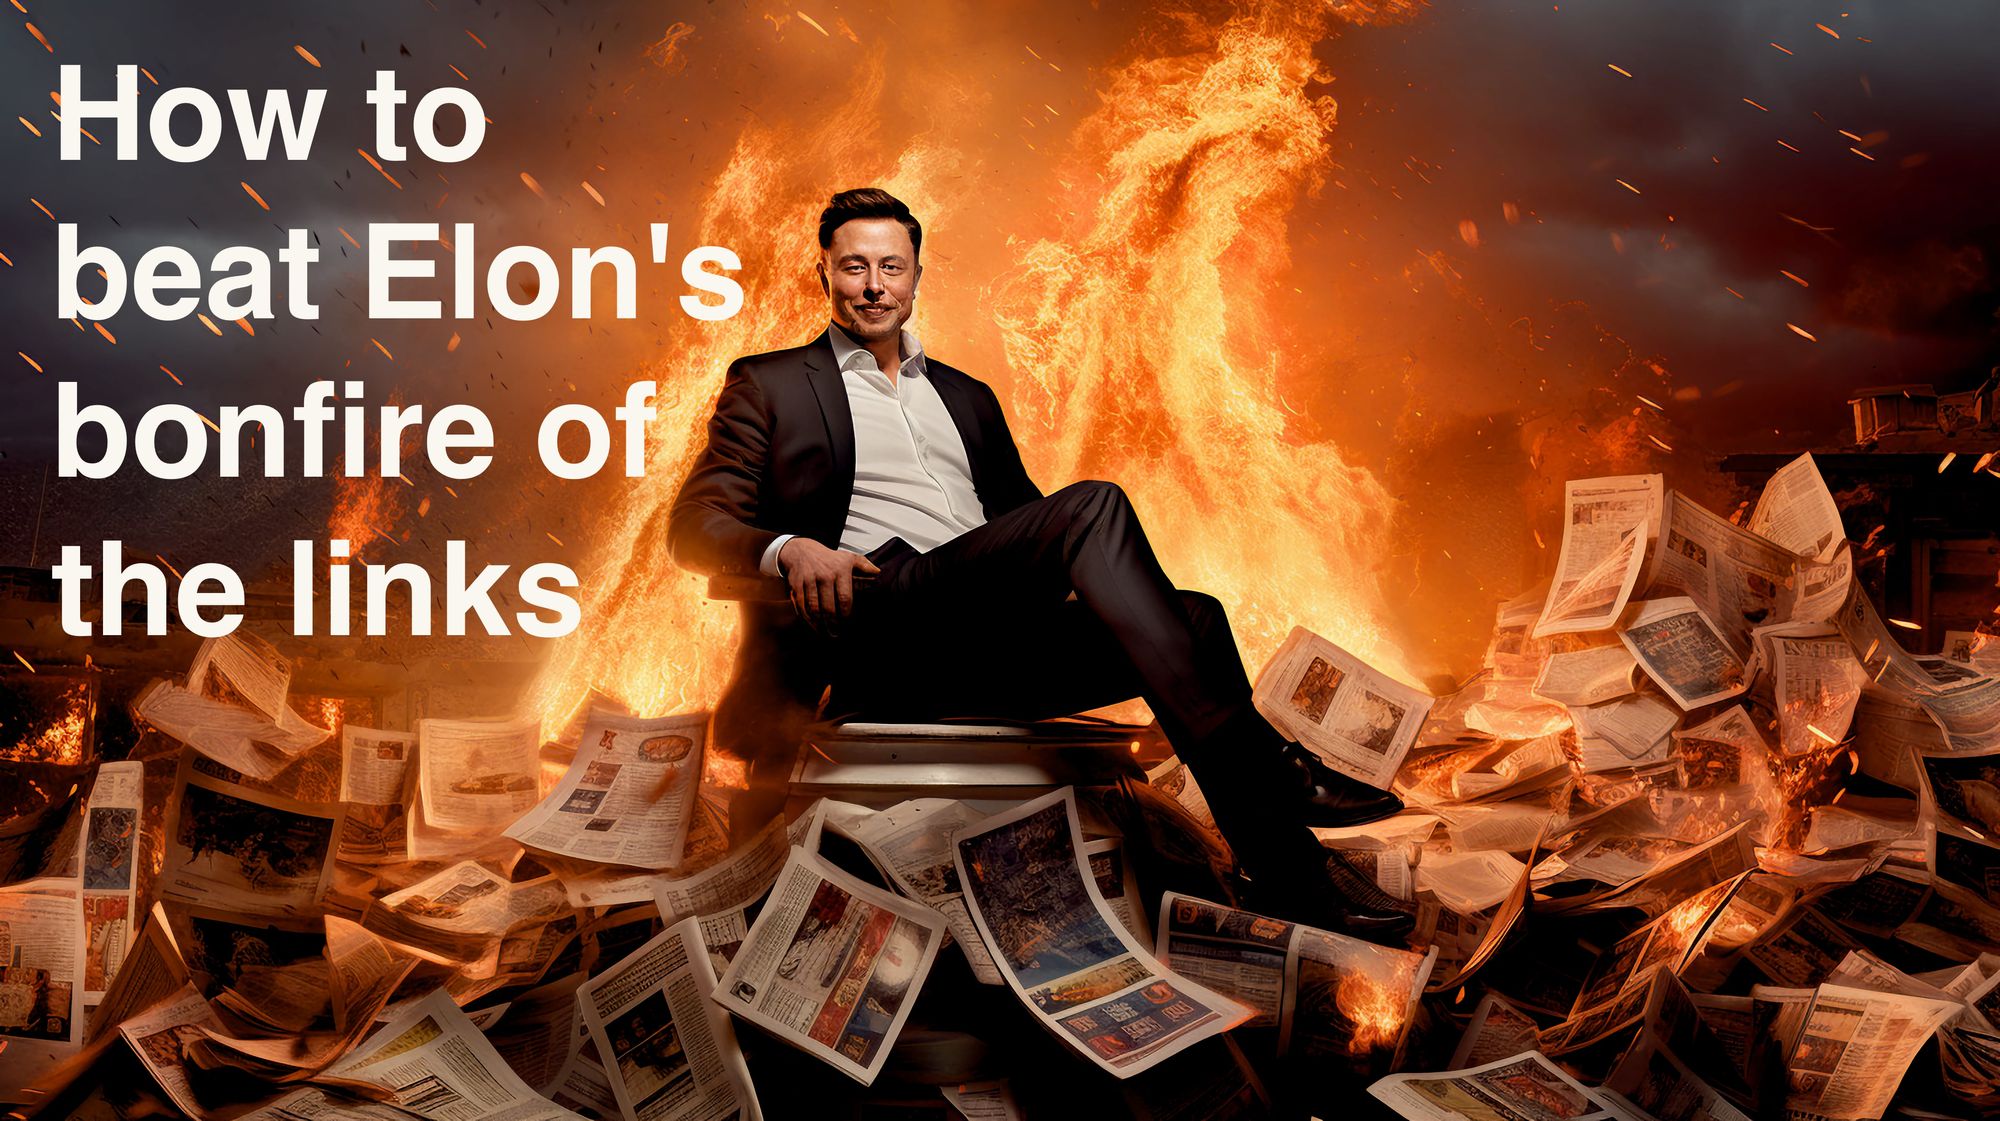 An AI generated image of Elon Mush sitting on burning newspapers, with a headline "How to beat Elon's bonfire of the links".